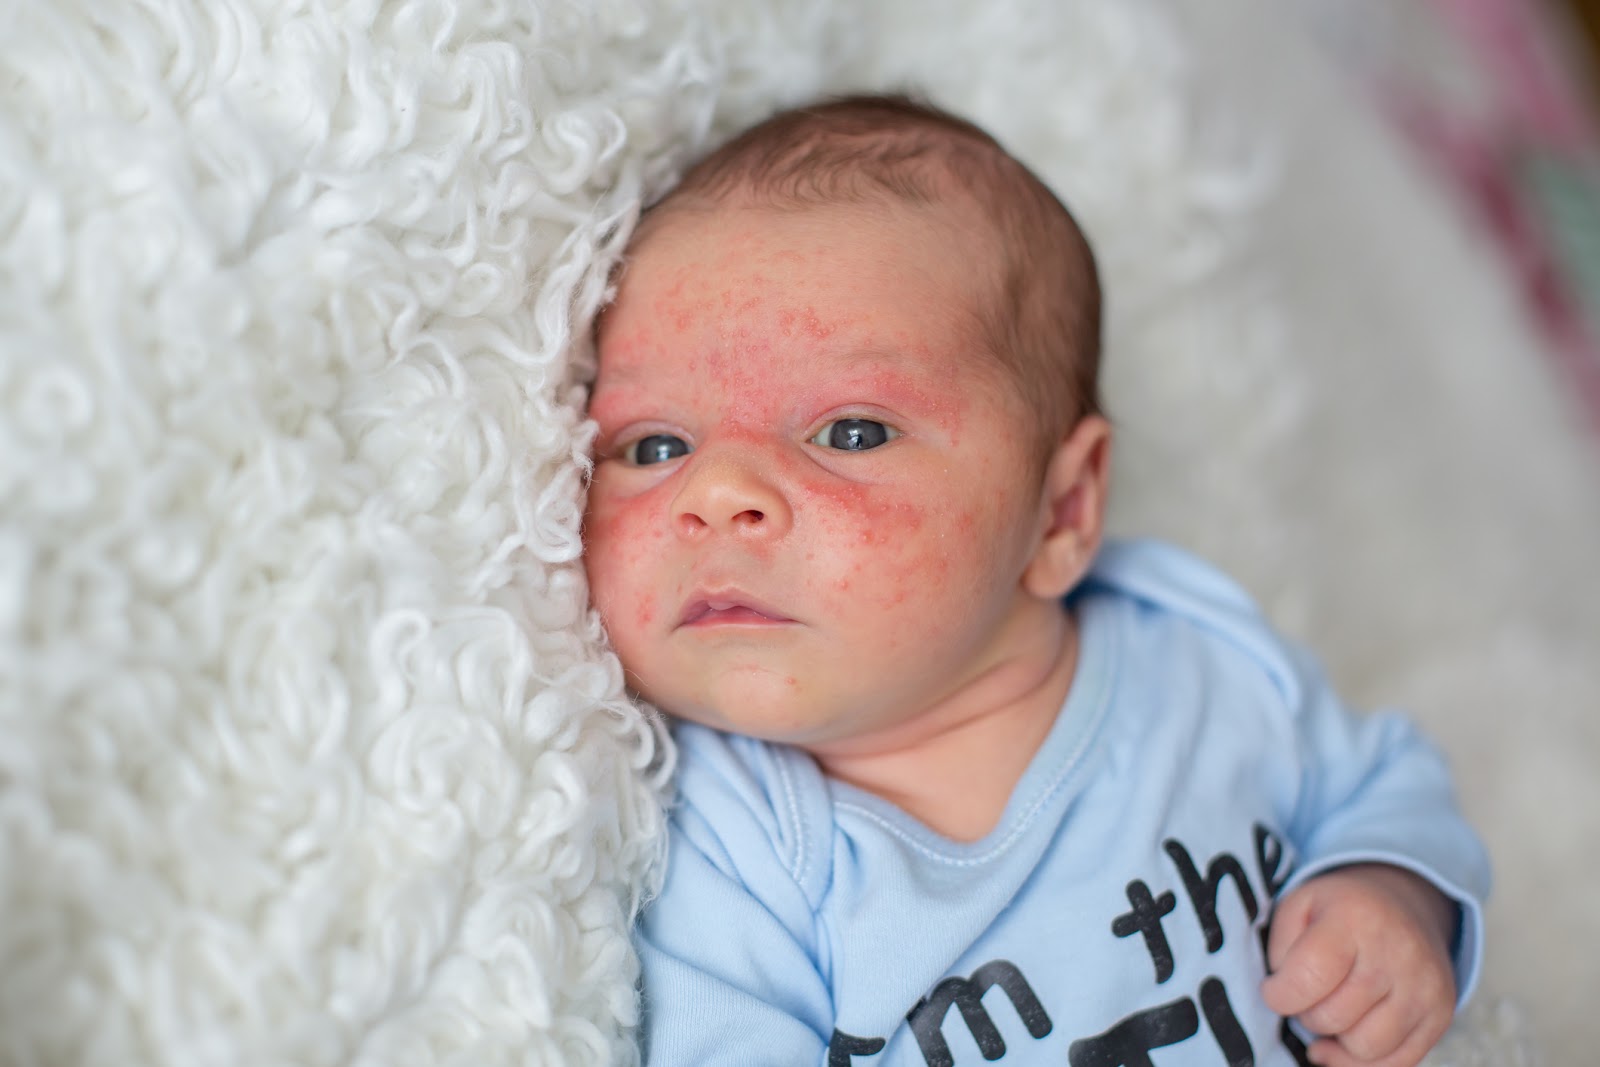 Image of baby with eczema on their face.